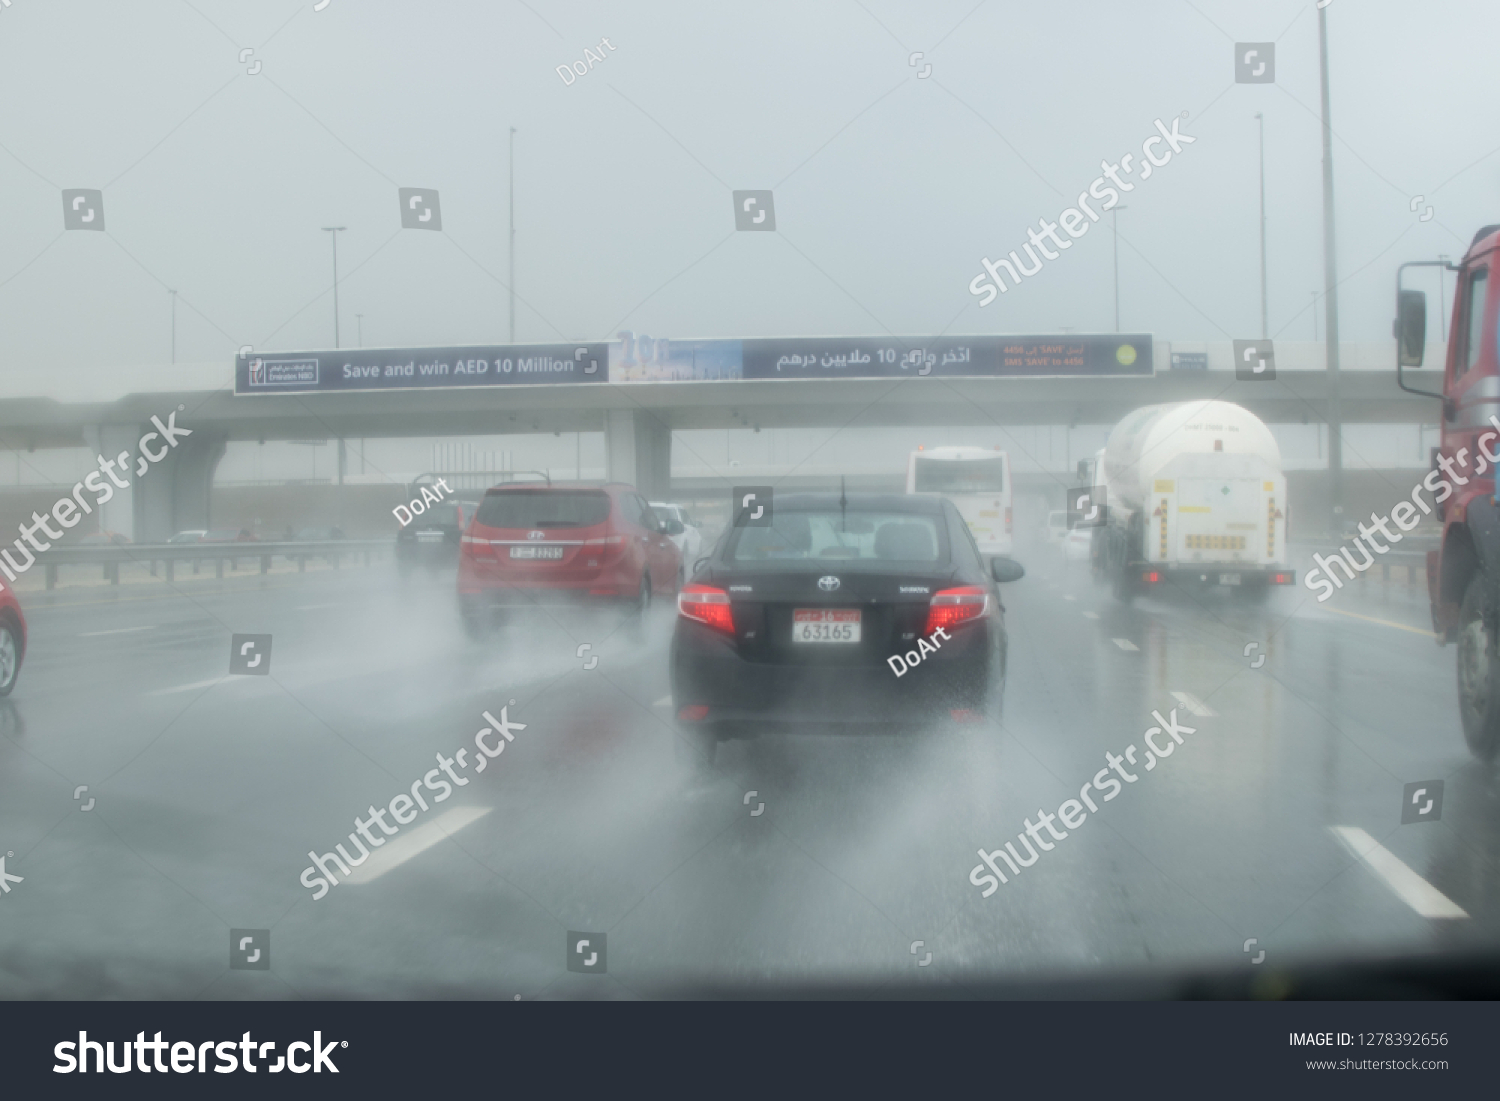 Dubai during rainy day on al khial road and wet street December 2018 #1278392656